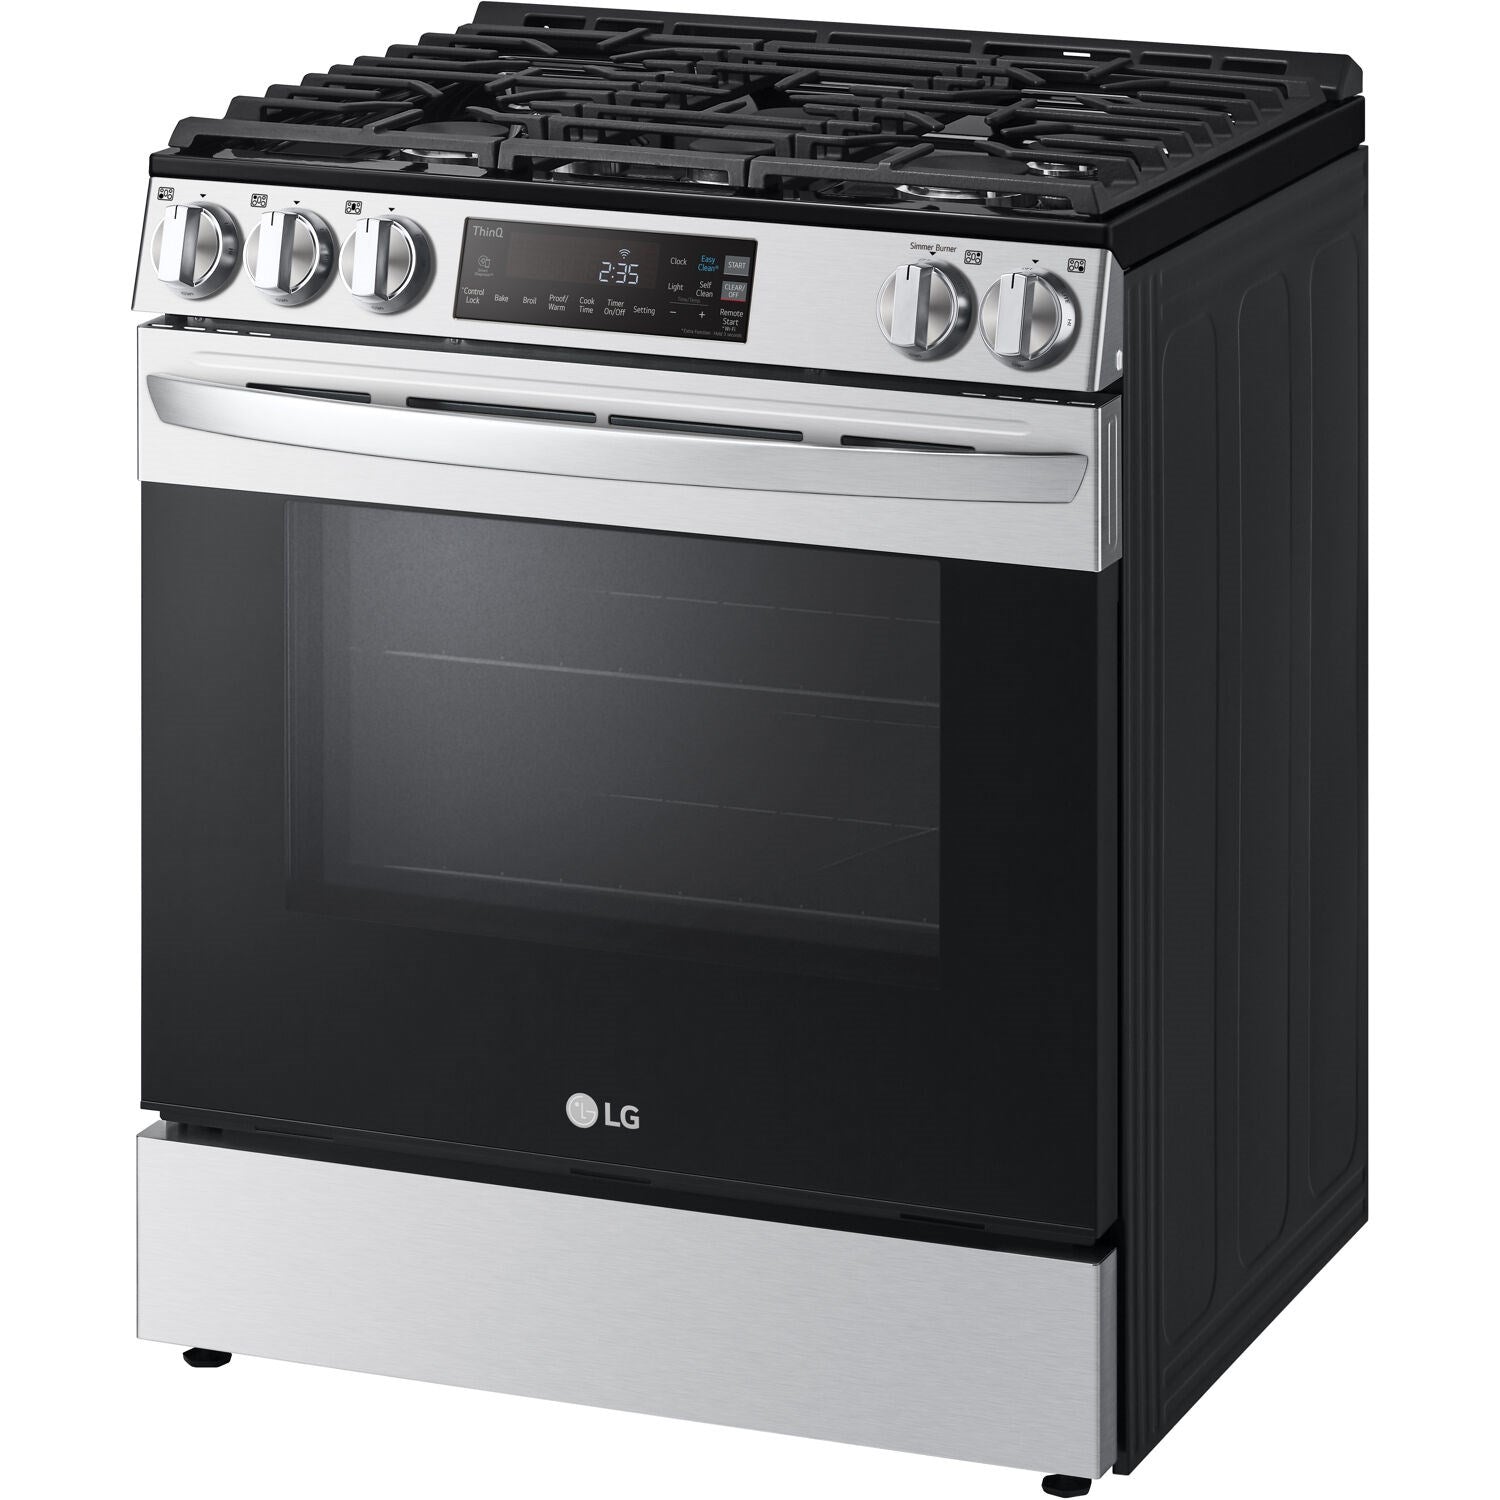 LG - 5.8 CF Gas Single Oven Slide-In Range, EasyClean Plus Self Clean, ThinQ and French Door Refrigerator Bundle